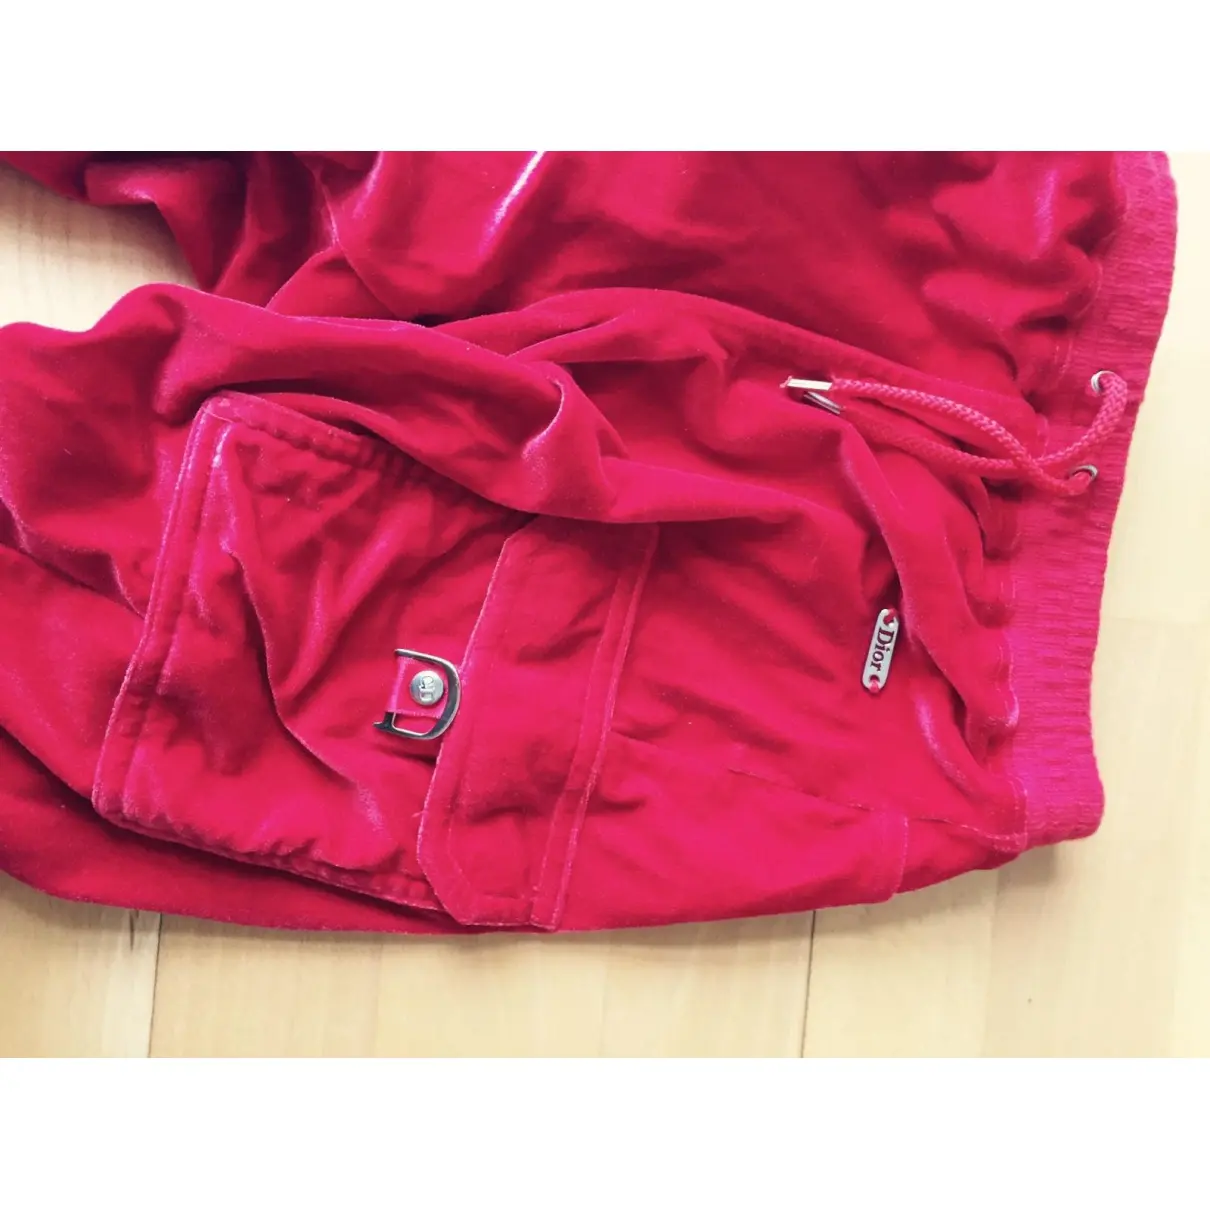 Buy Baby Dior Red Trousers online